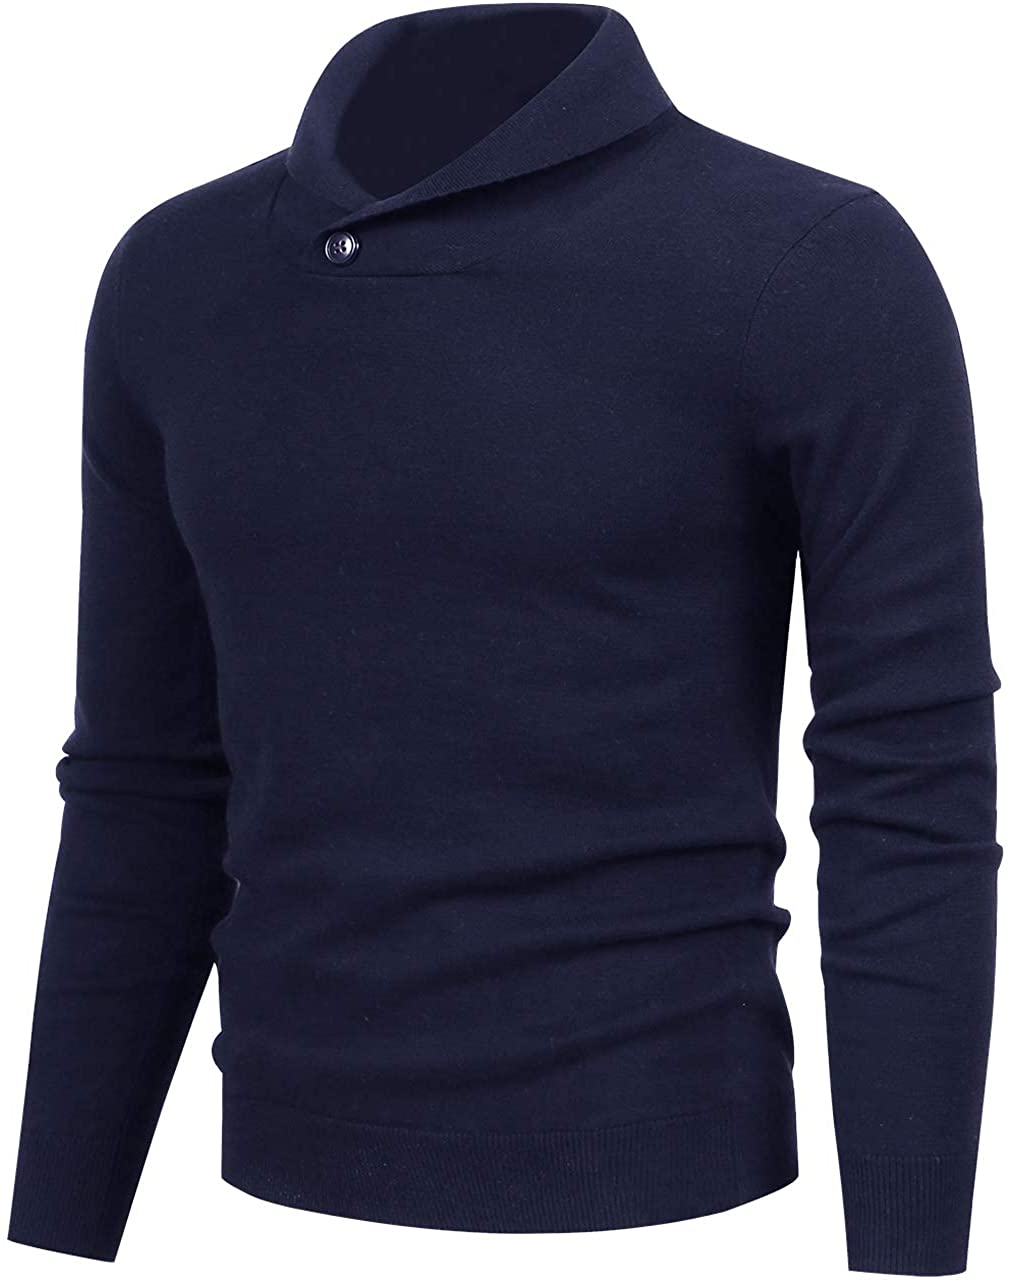 LTIFONE Mens Shawl Sweaters,Casual Slim Fit,Knitted Collar Long Sleeve ...